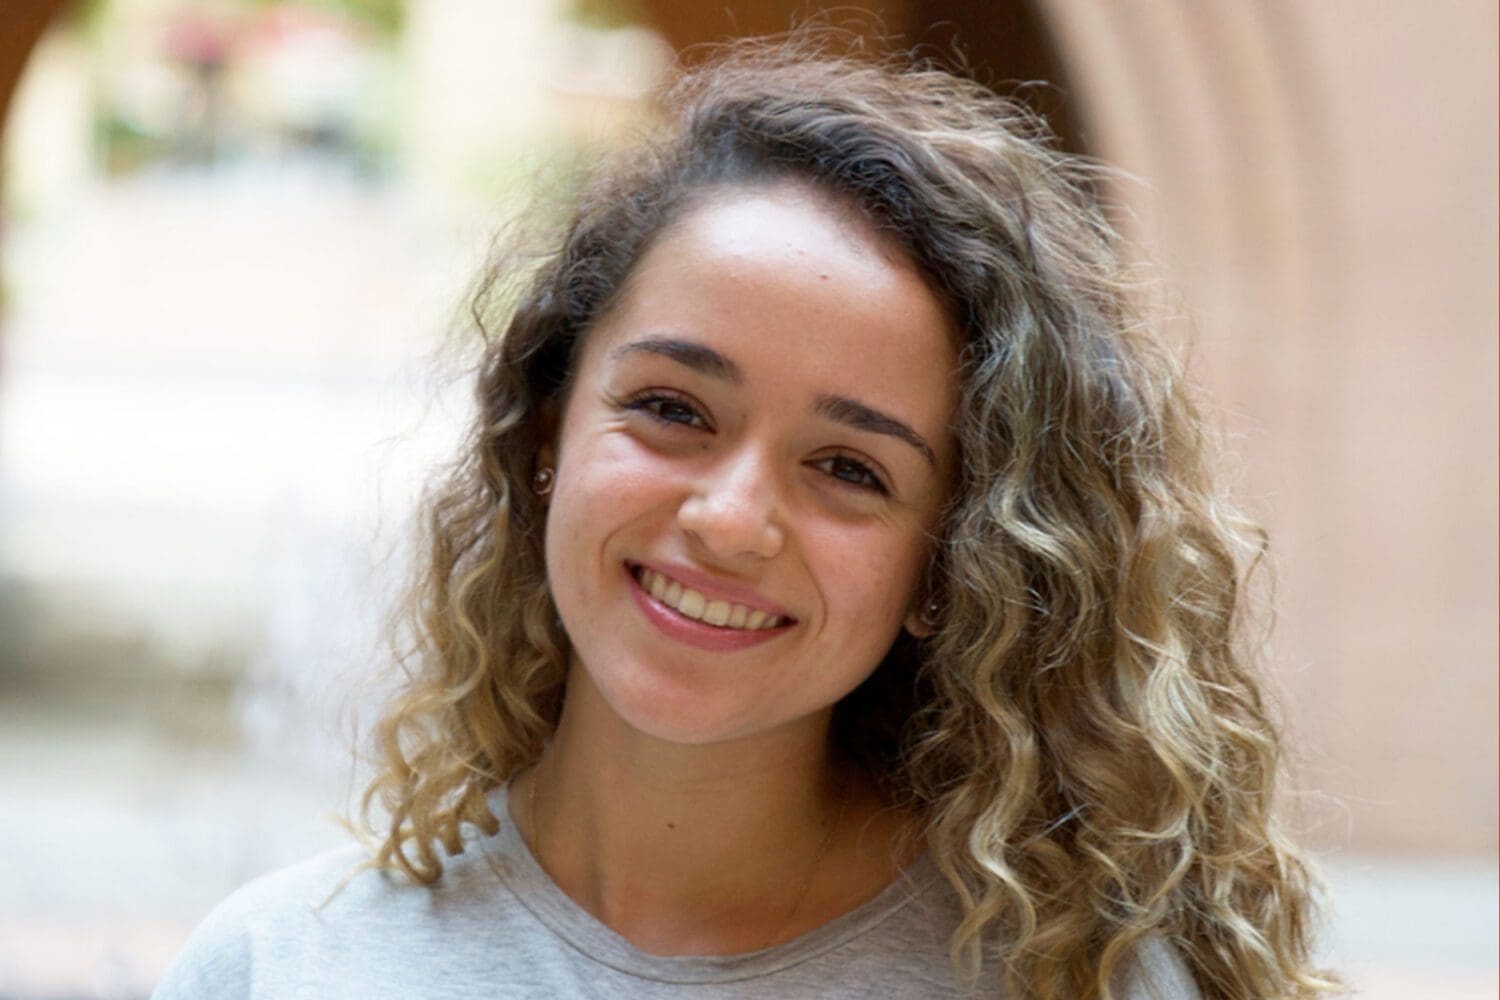 Undergraduate student Luly Bustamante hopes to spread awareness of gerontology